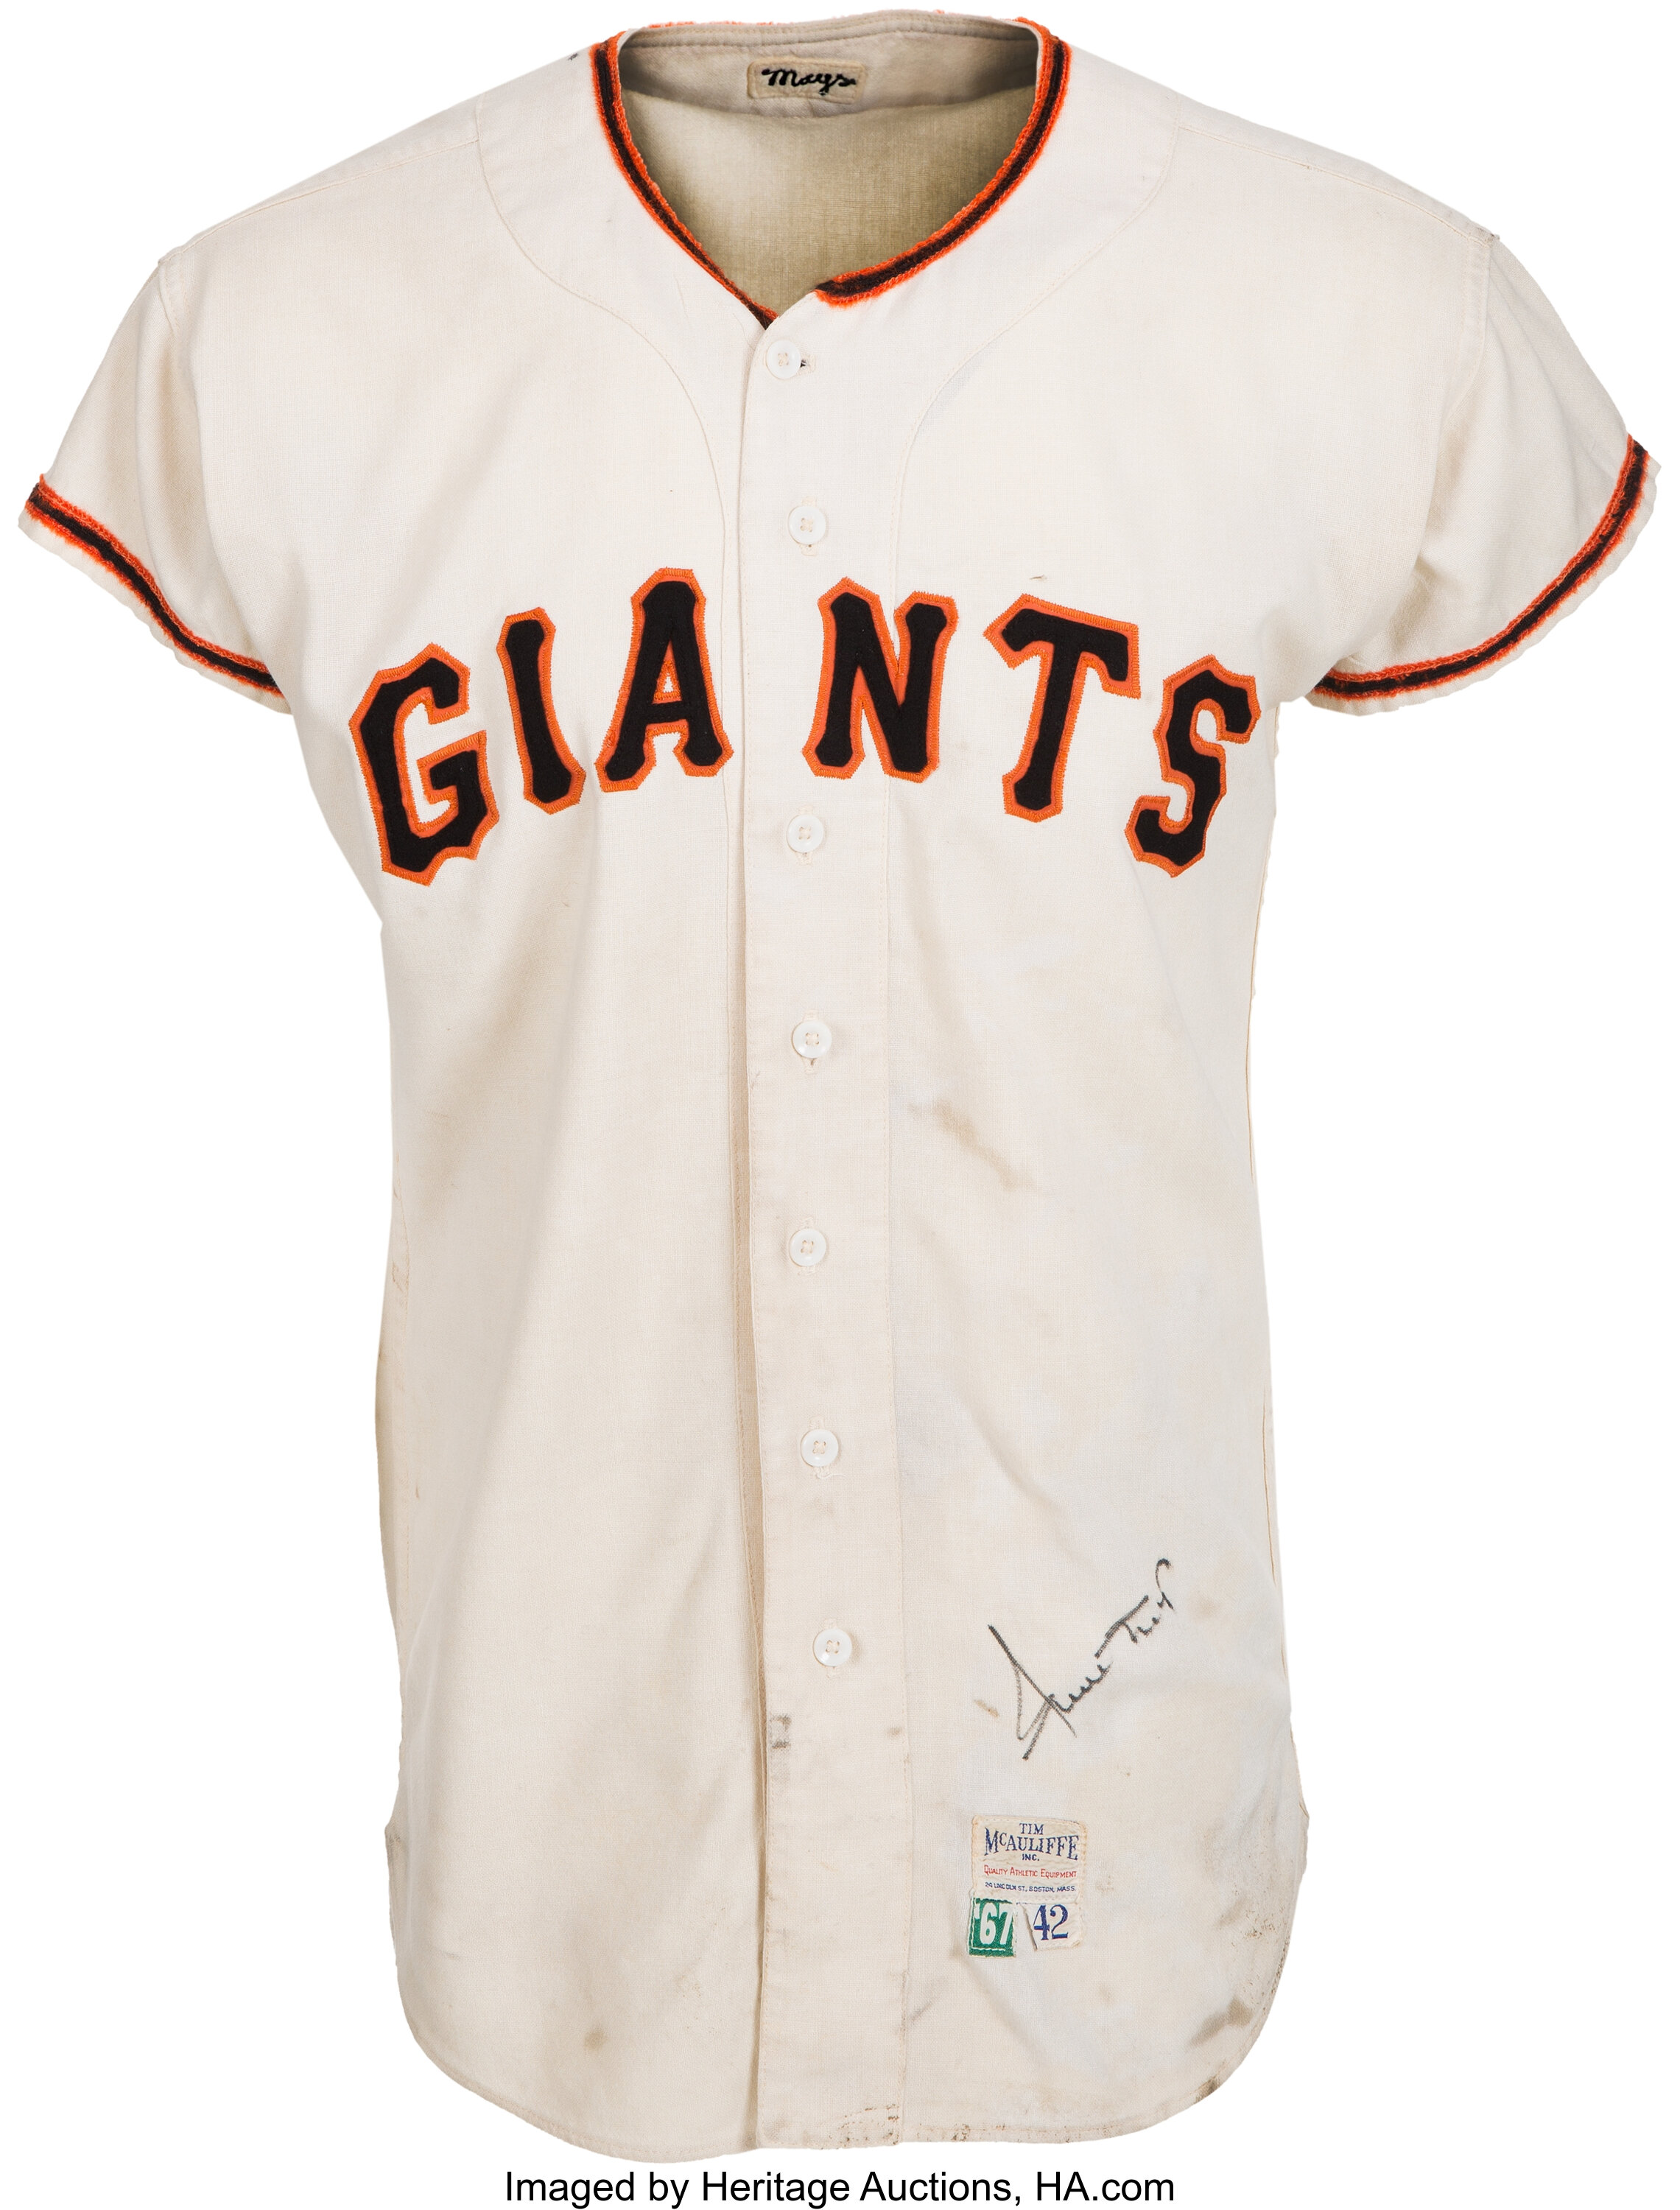 1967 Willie Mays Game Worn San Francisco Giants Jersey, MEARS, Lot #80006